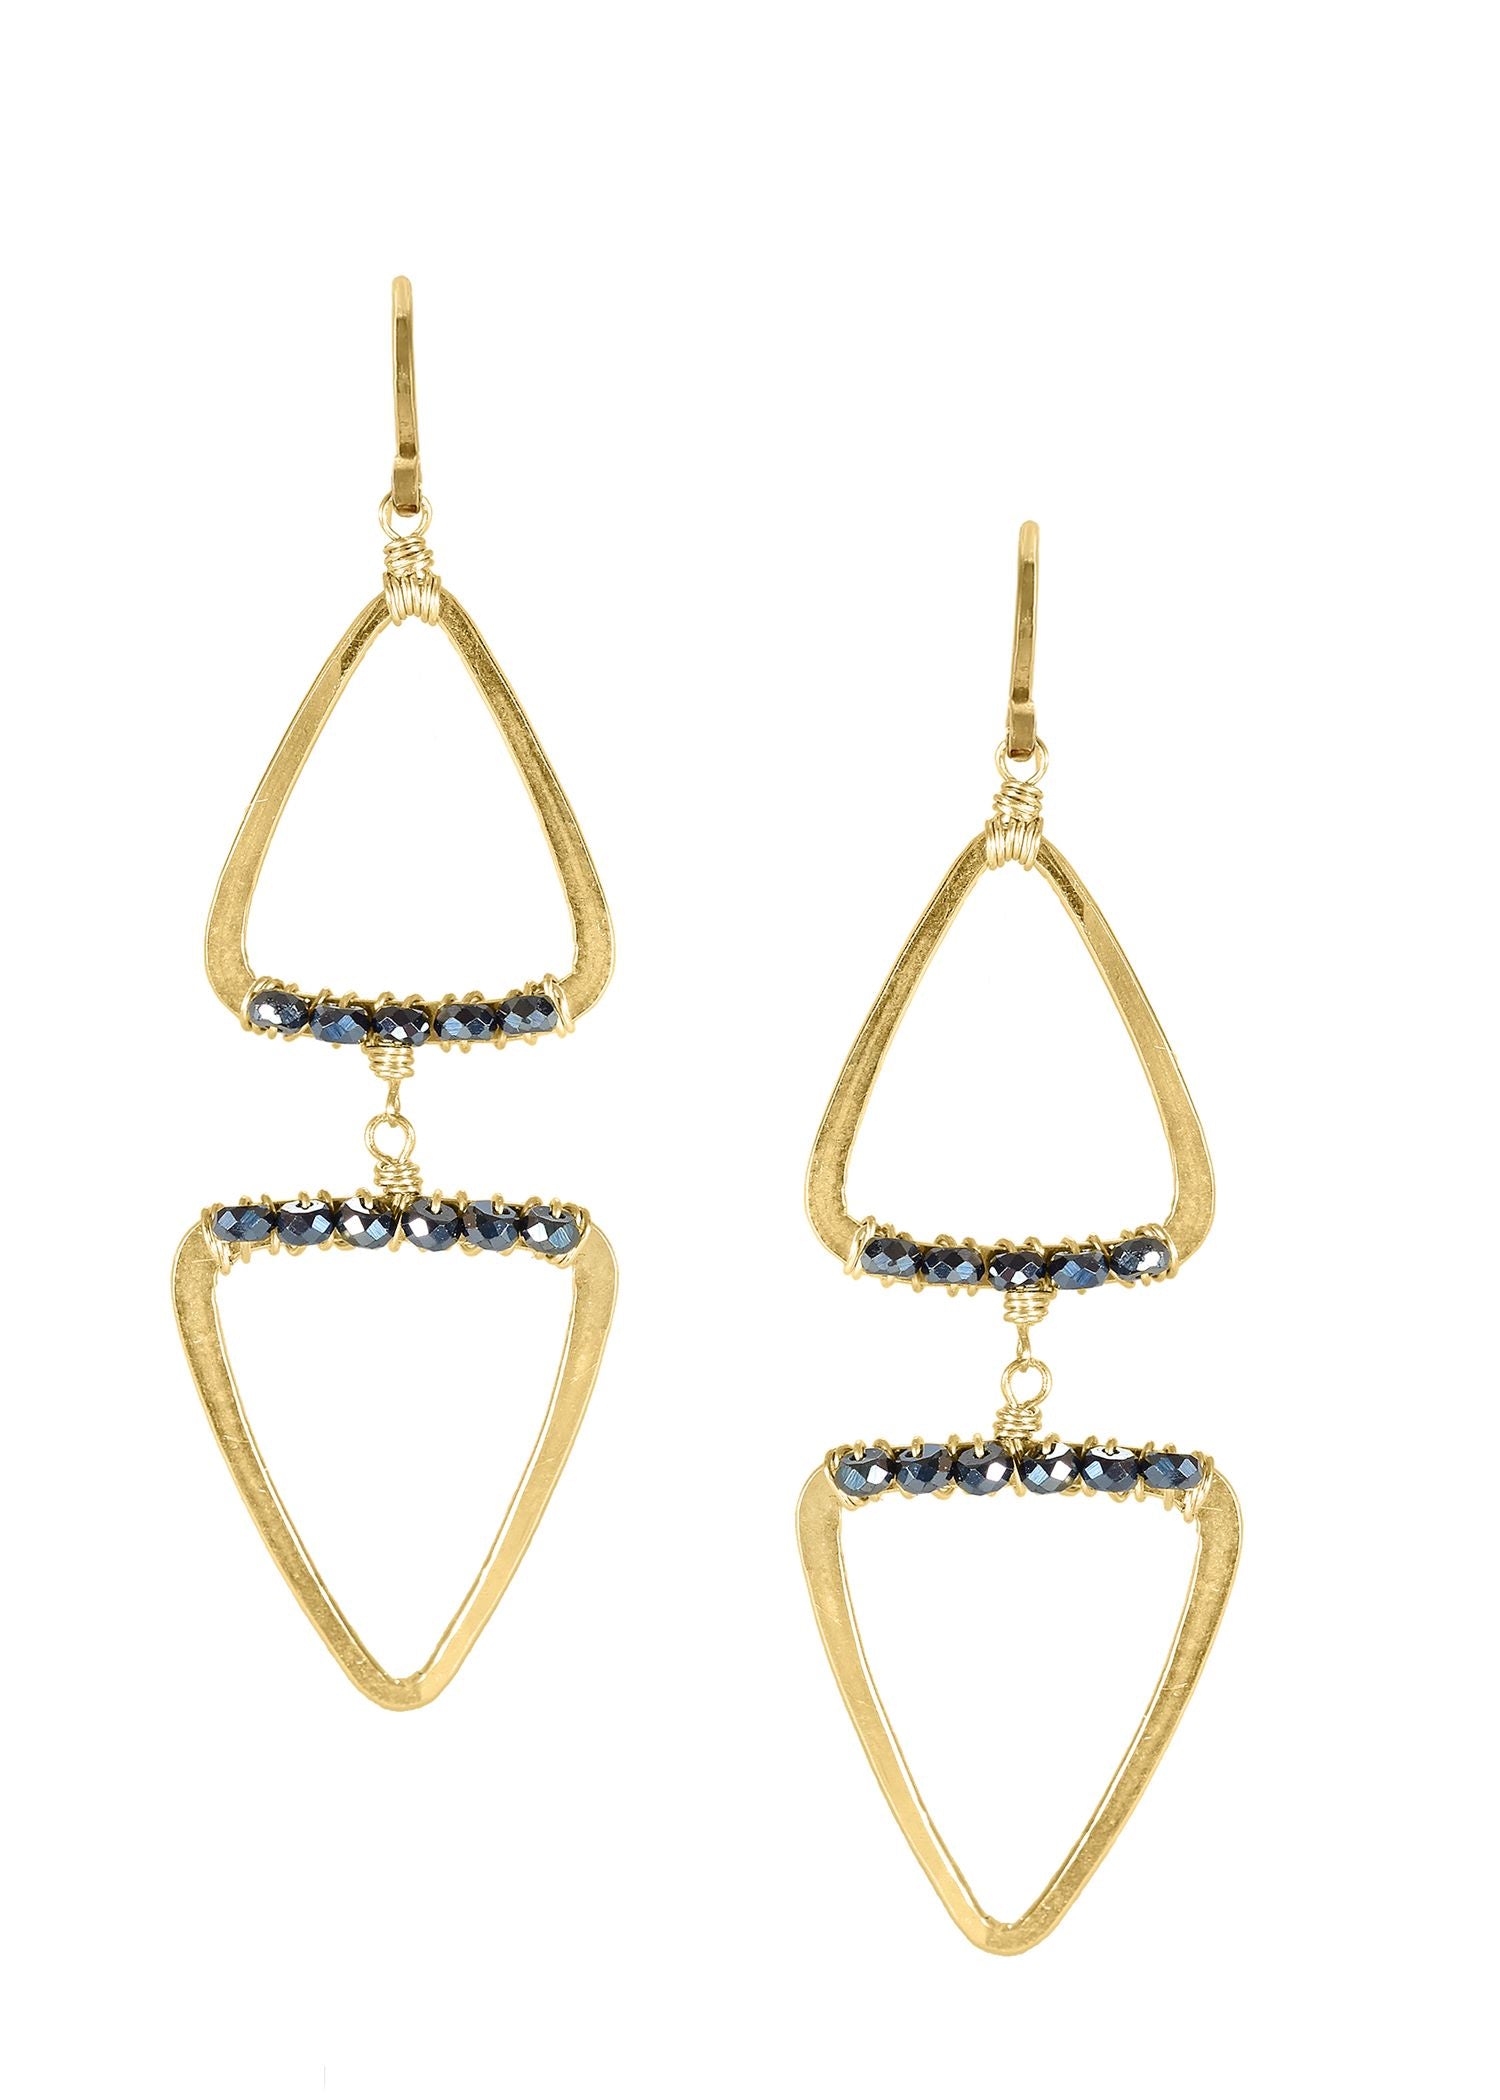 Black spinel 14k gold fill Earrings measure 2" in length (including the ear wires) and 9/16" in width Handmade in our Los Angeles studio